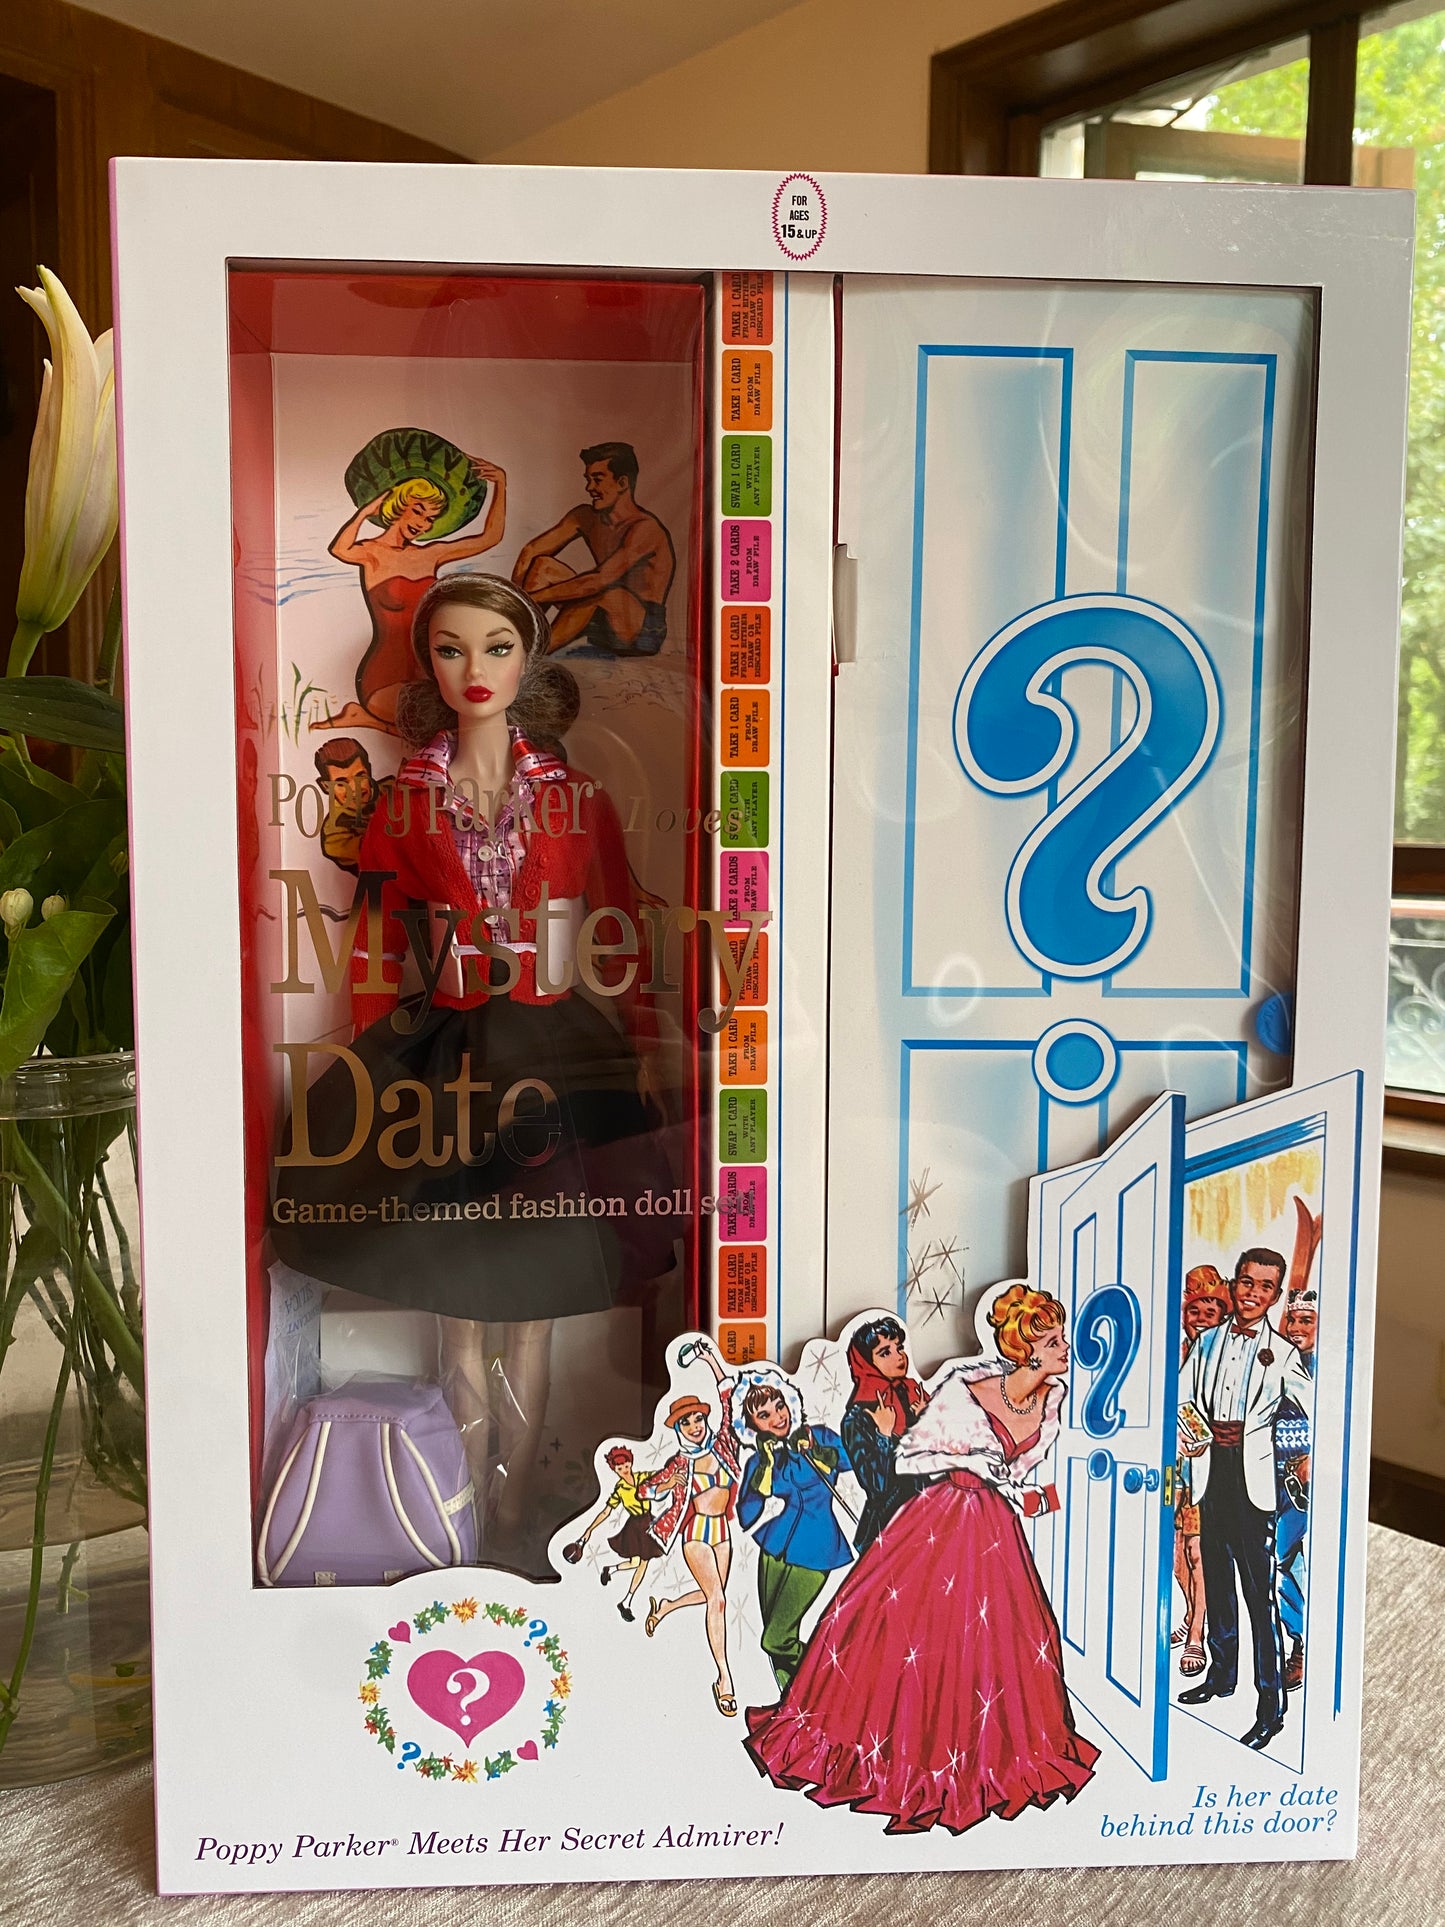 Poppy Parker Mystery Date Bowling Date Integrity Toys 2 doll set W Club Exclusive